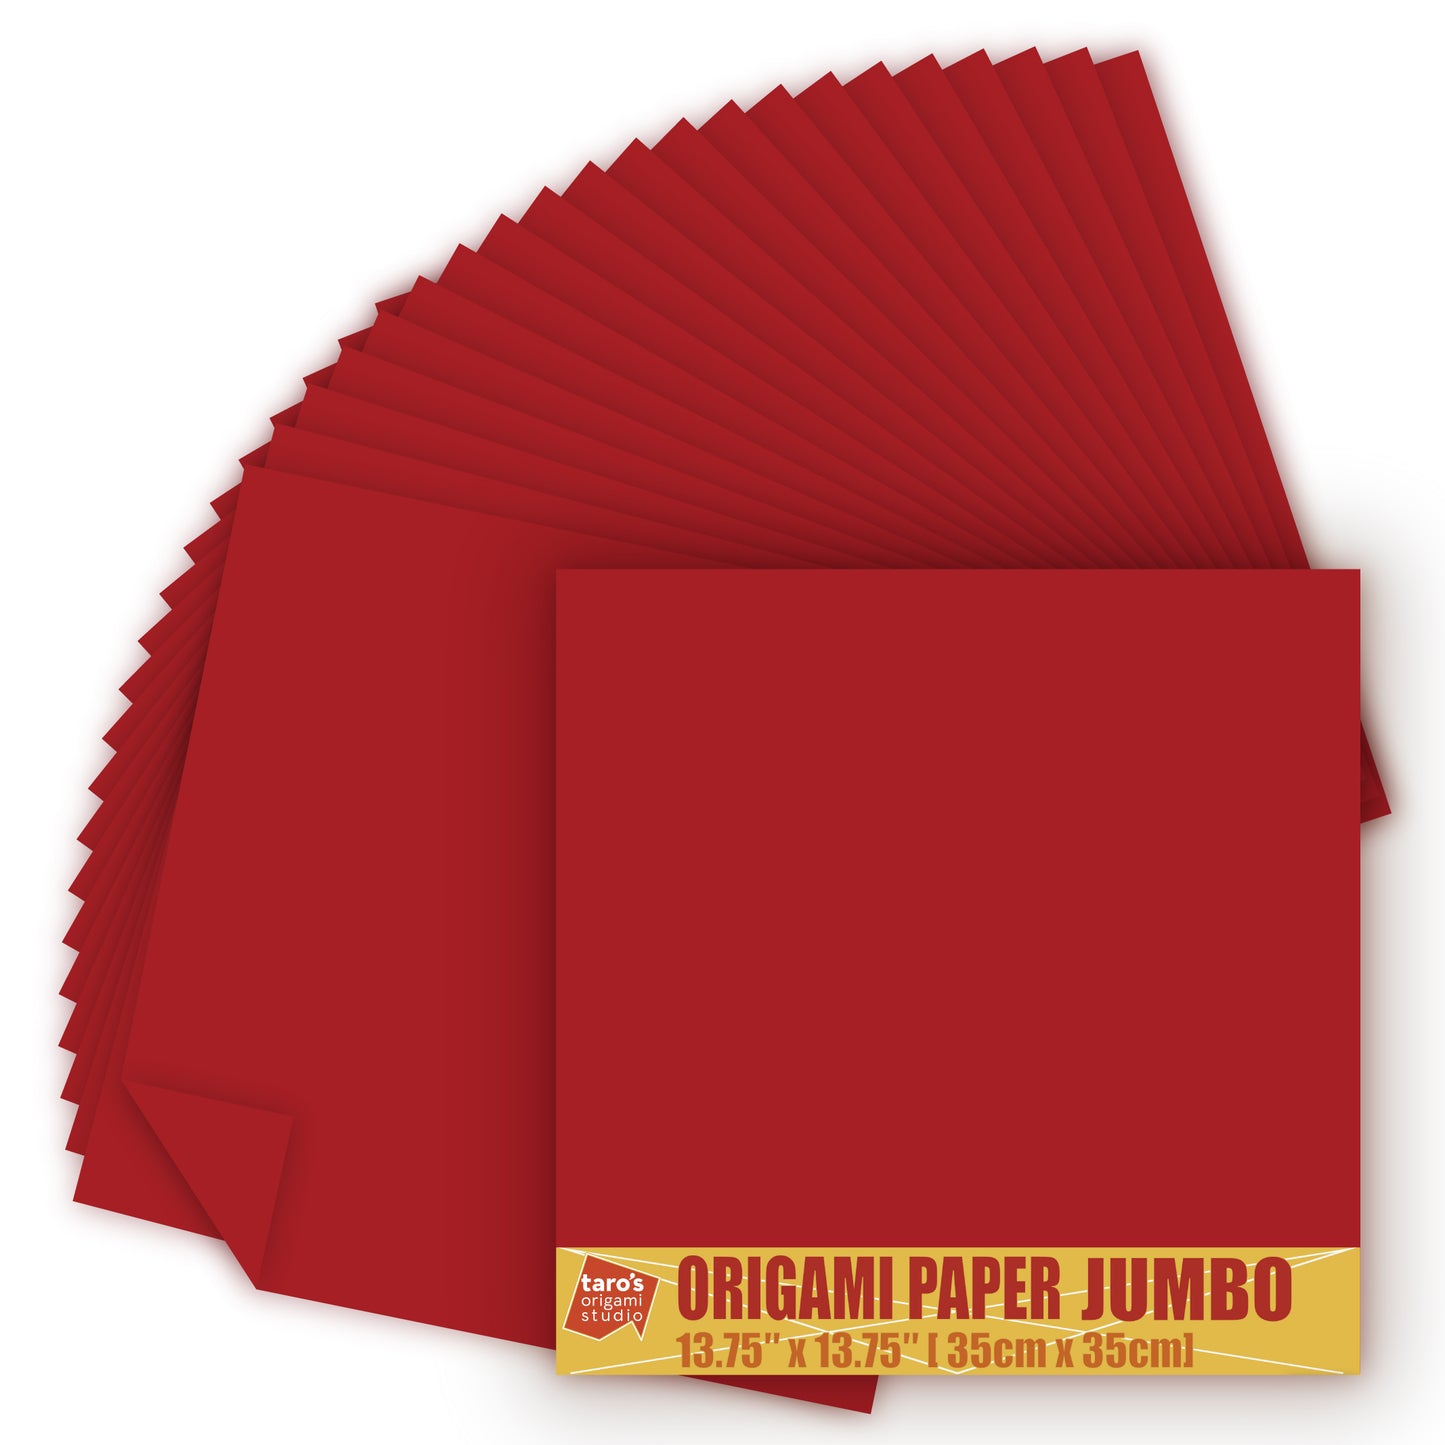 [Taro's Origami Studio] TANT Jumbo 13.75 Inch (35 cm) Double Sided Single Color (Reddish Brown) 20 Sheets (All Same Color) for Beginner to Expert (Made in Japan)